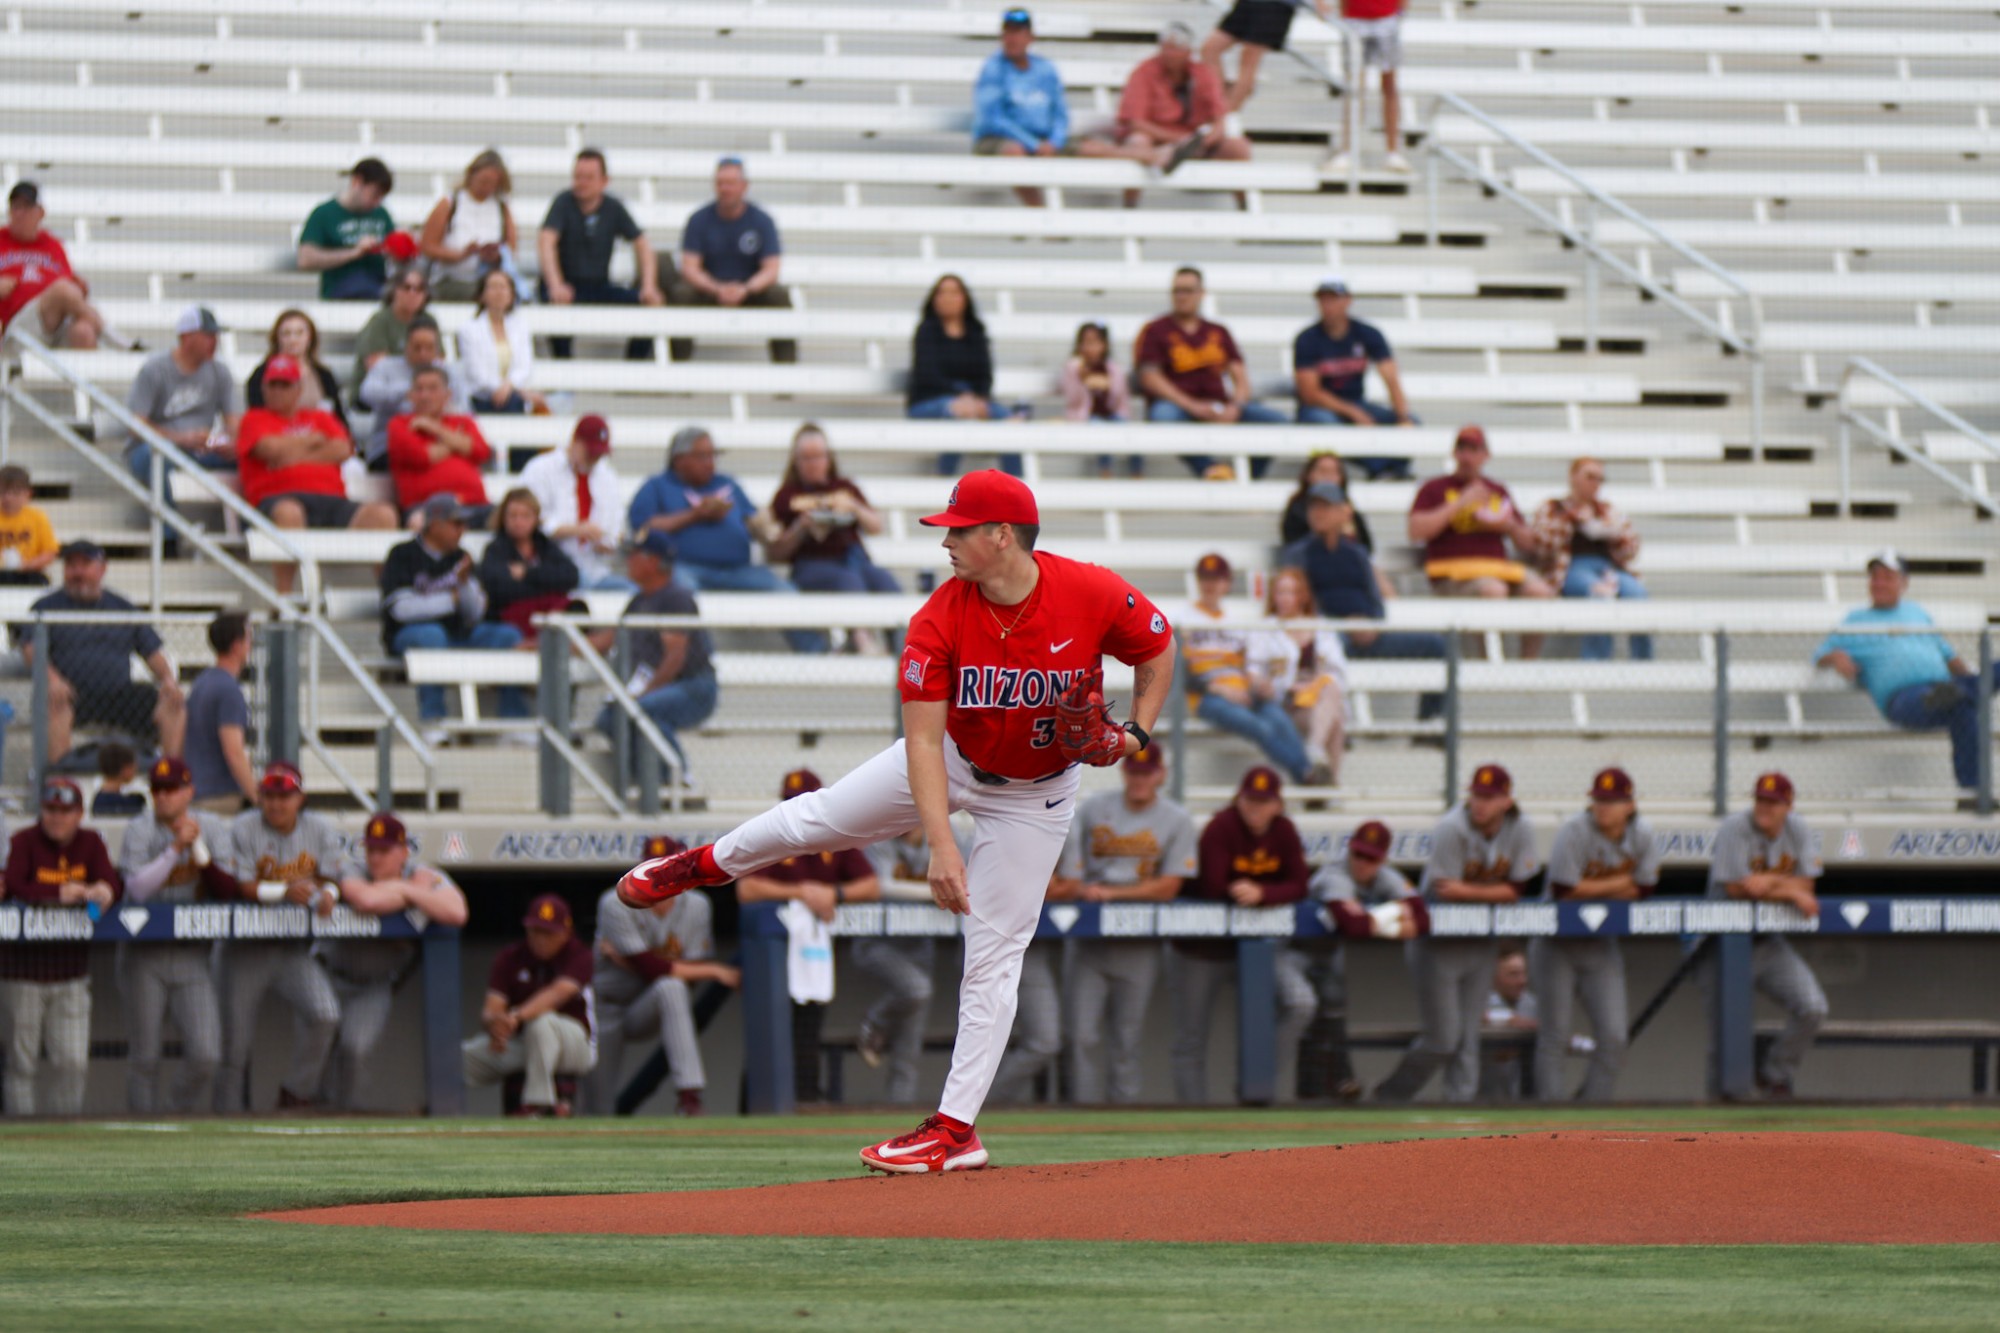 Arizona's Cam Walty throws a pitch against Arizona State at Hi Corbett Field on April 19. Walty pitched 7 scoreless innings in a game against ASU. 